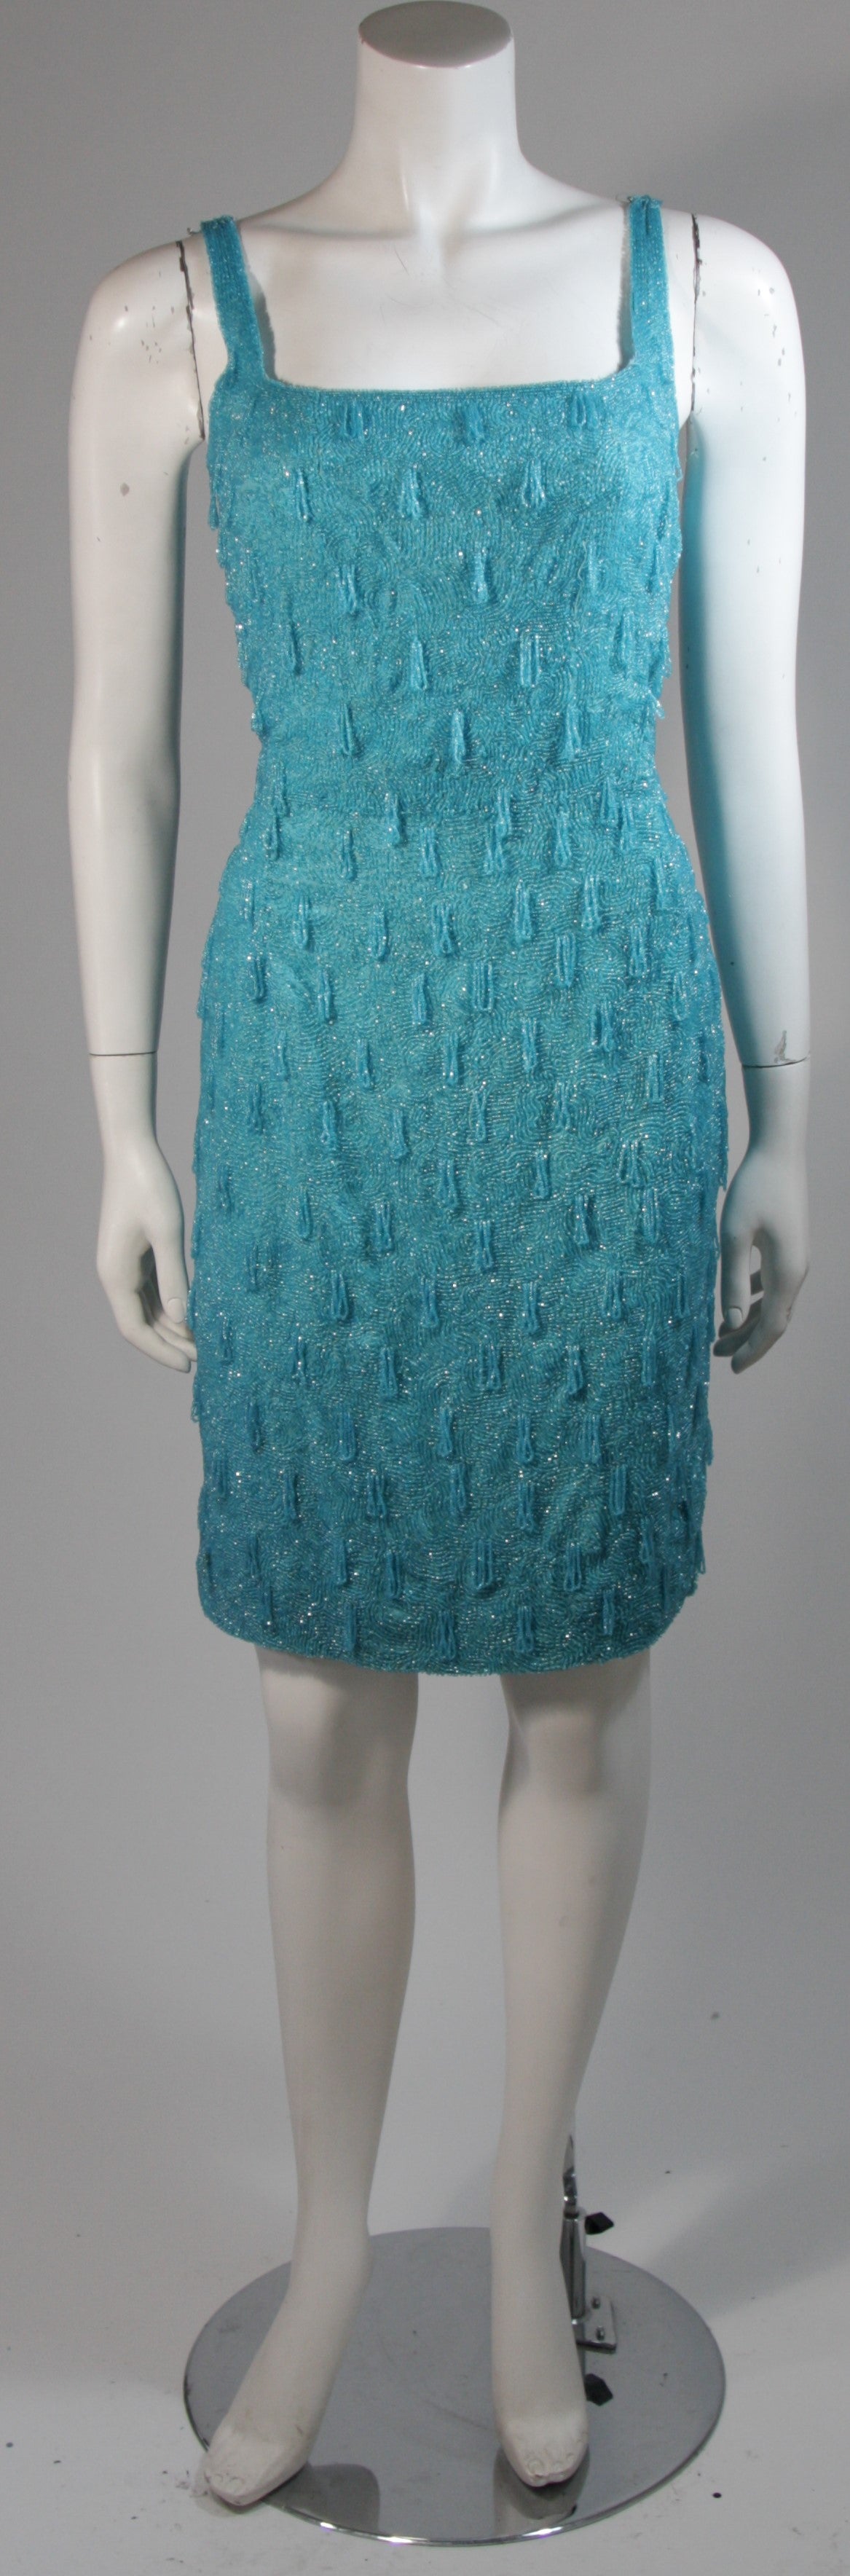 This vintage cocktail dress features heavy beading in an aqua hue with a drape accent of some of the beading. An absolutely stunning piece. There is a center back zipper. In excellent condition. 

**Please cross-reference measurements for personal